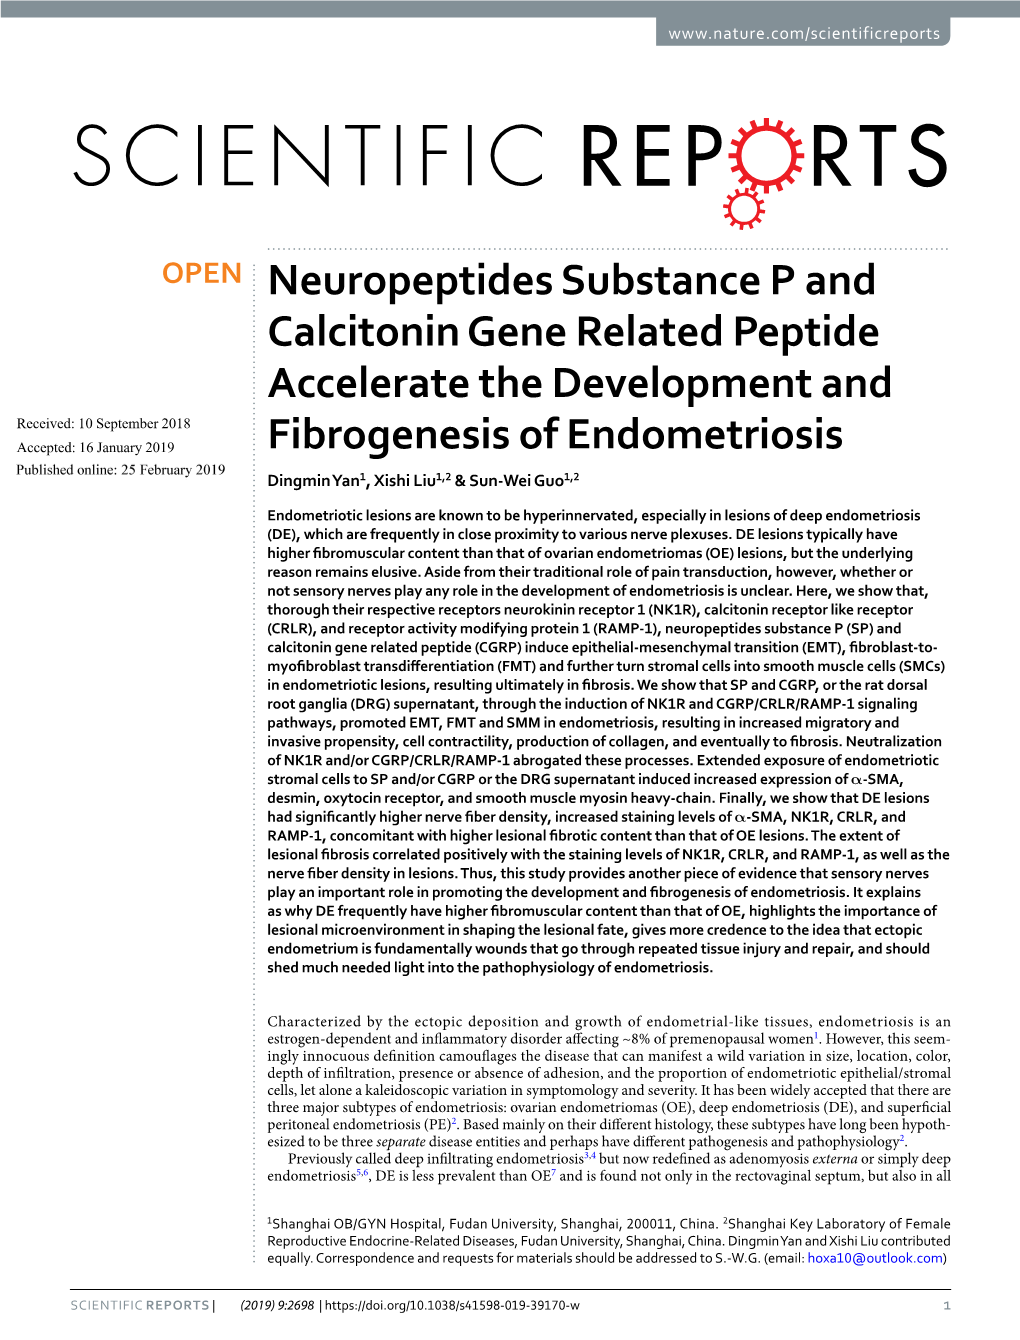 Neuropeptides Substance P and Calcitonin Gene Related Peptide